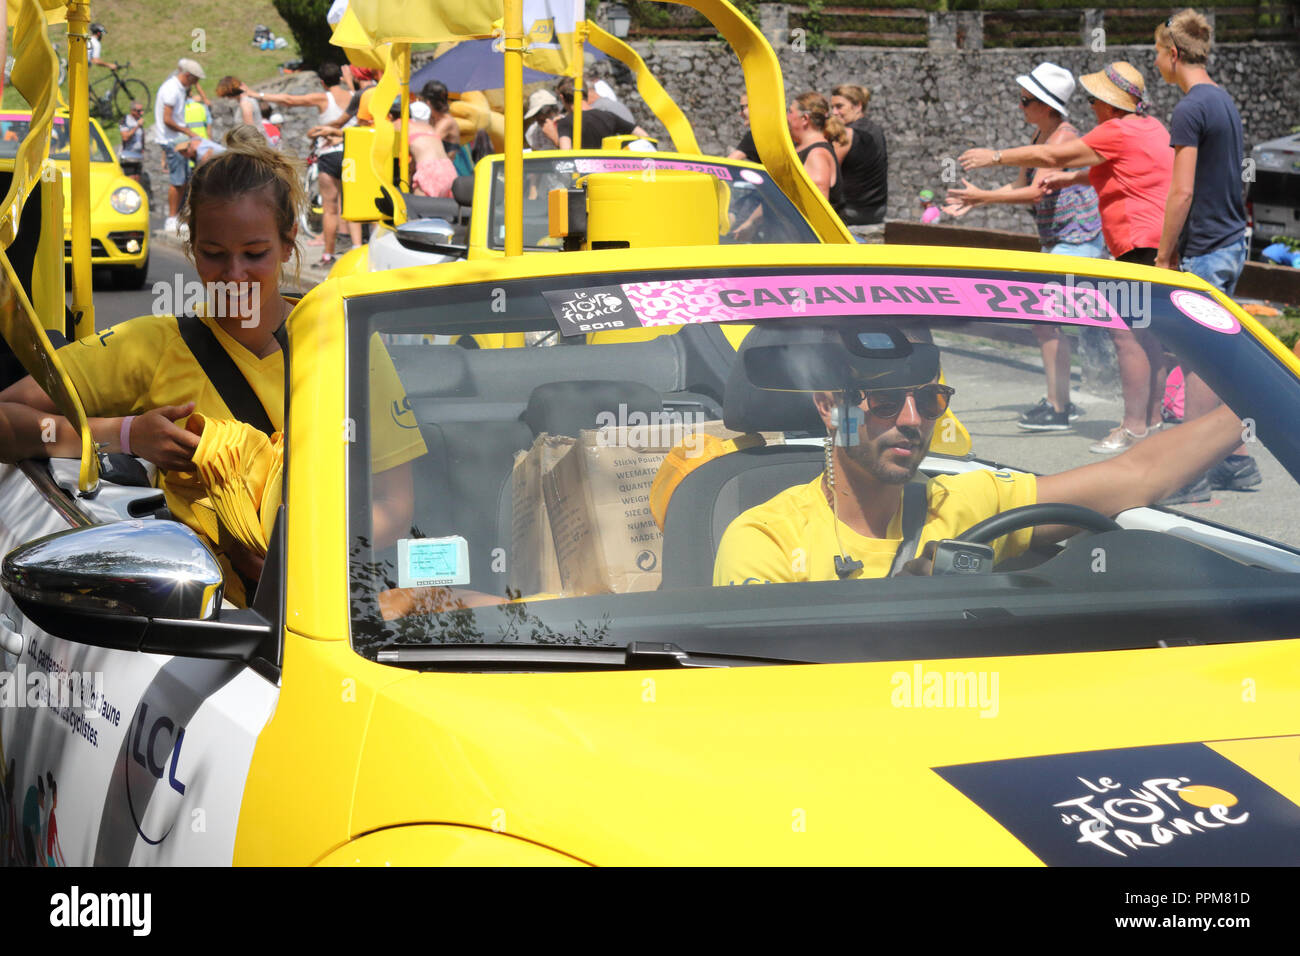 The yellow Le Crédit Lyonnais cars throwing free gifts during the 2018 Tour de France 17th stage in Soulan, French Pyrenees, and supporters. Stock Photo